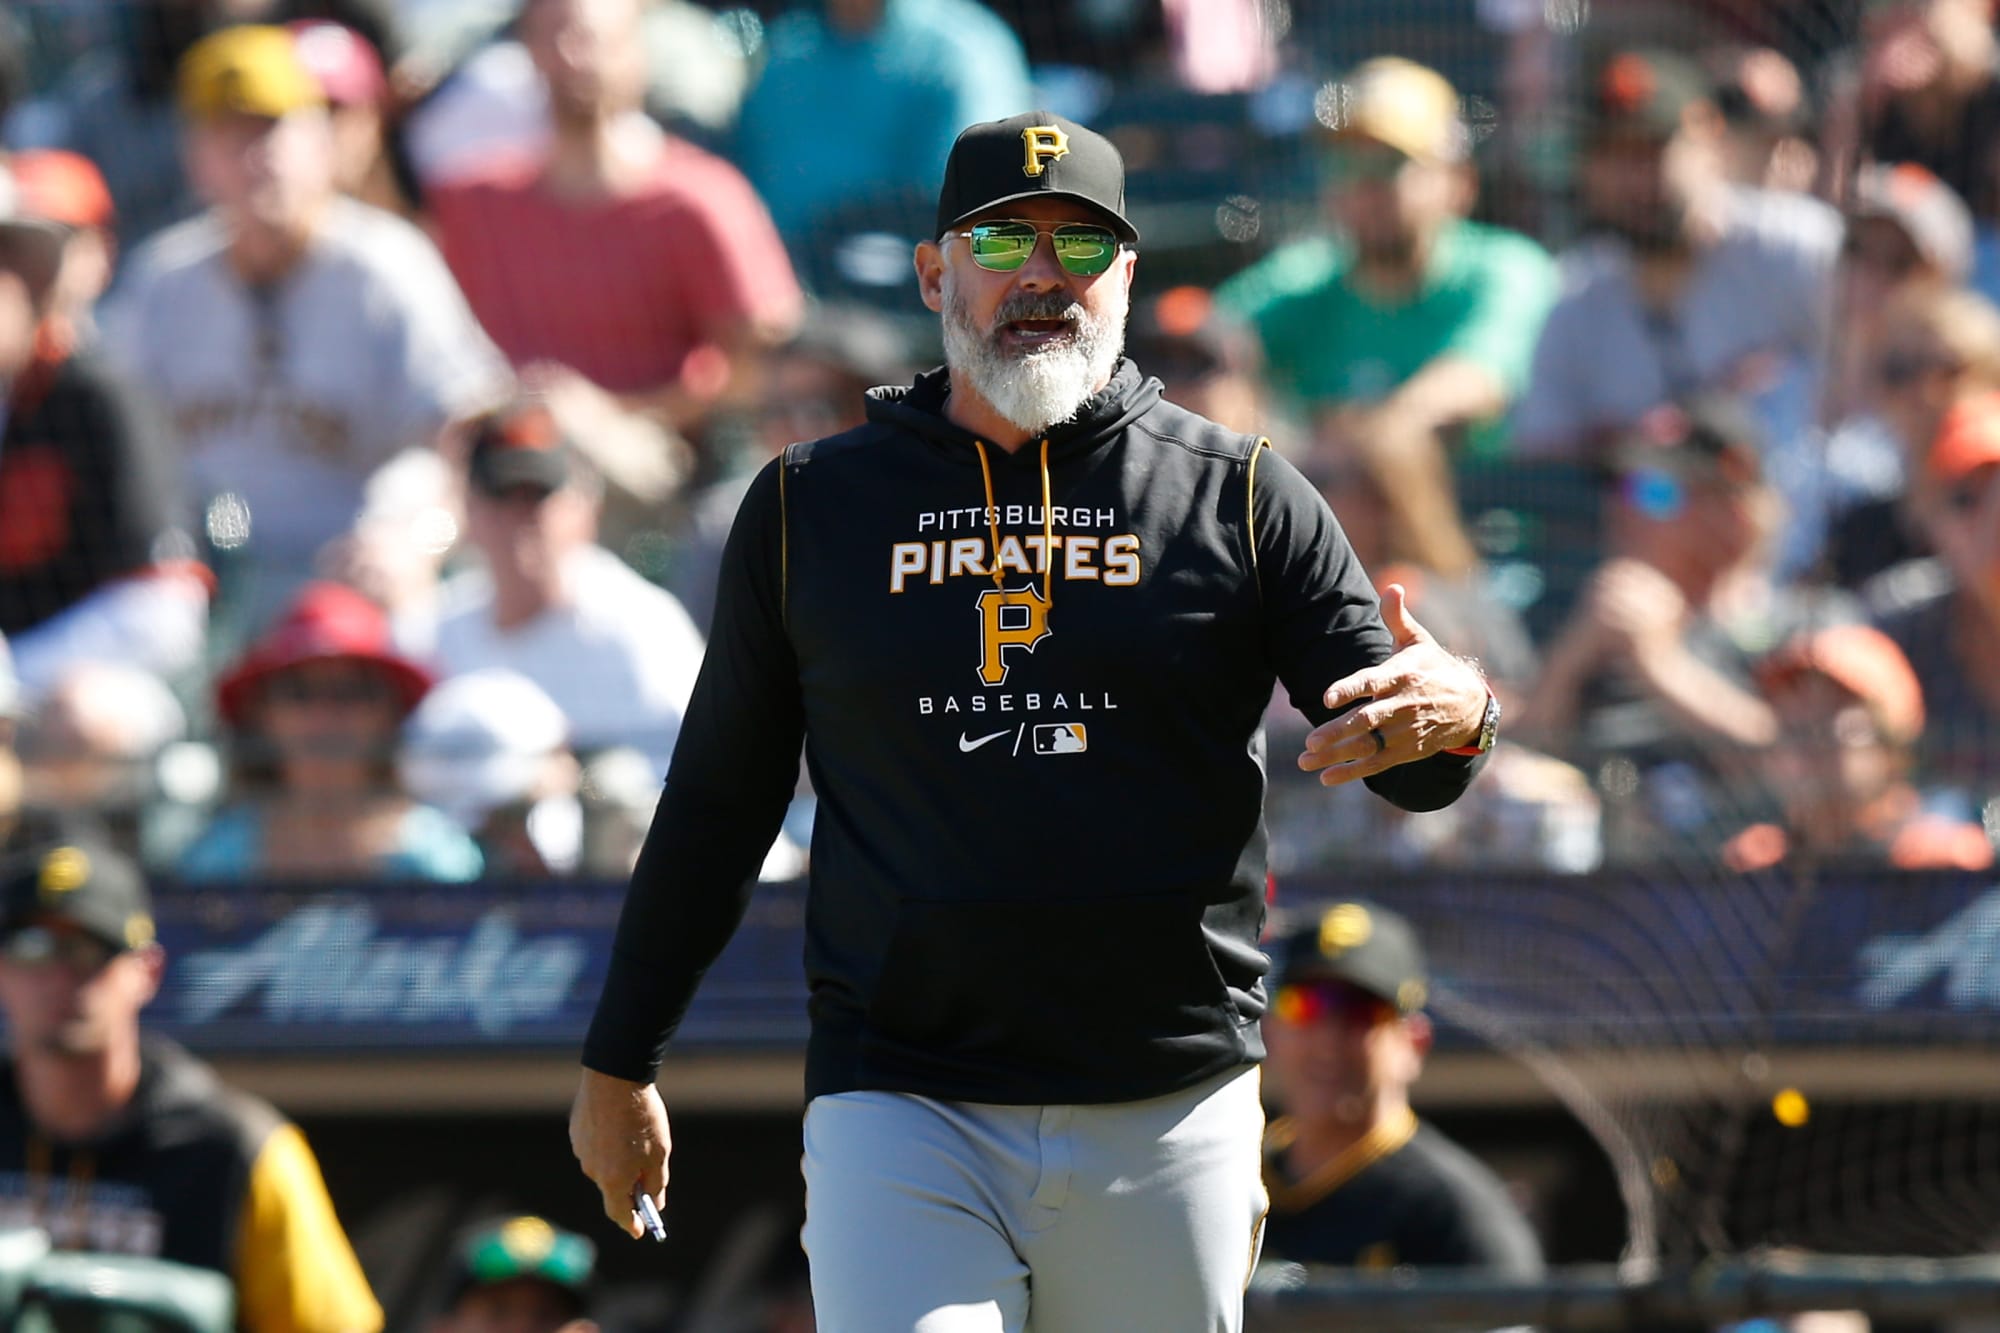 Pirates broadcaster embarrasses himself with comments about Derek